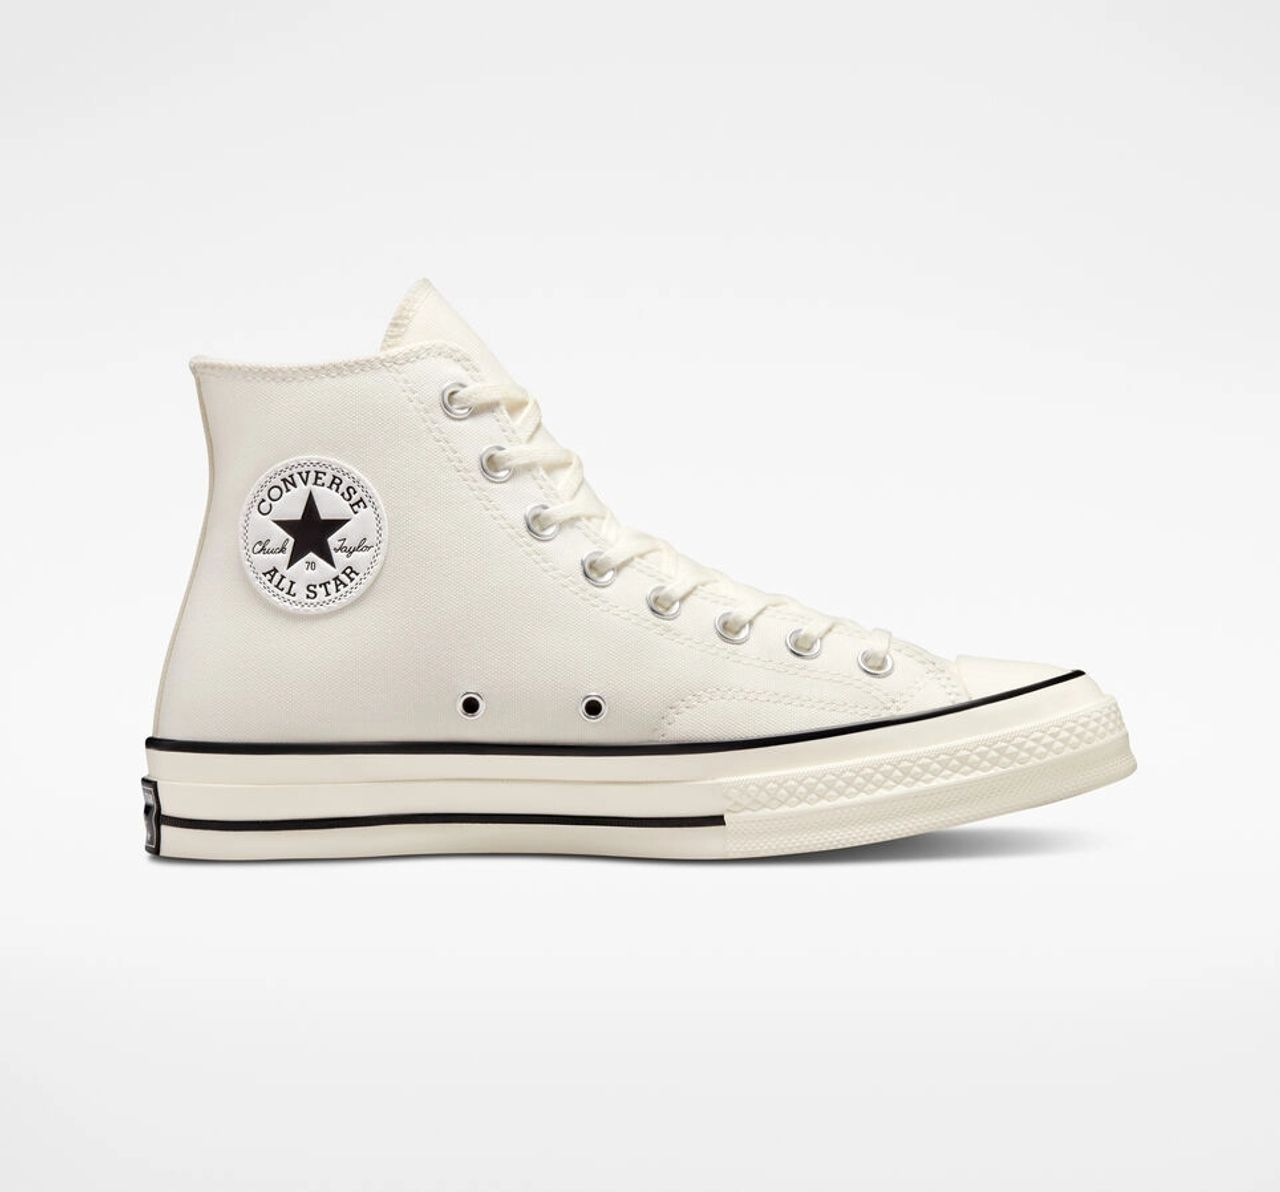  Giày Thể Thao Unisex CONVERSE Chuck Taylor All Star 1970S A04968C 